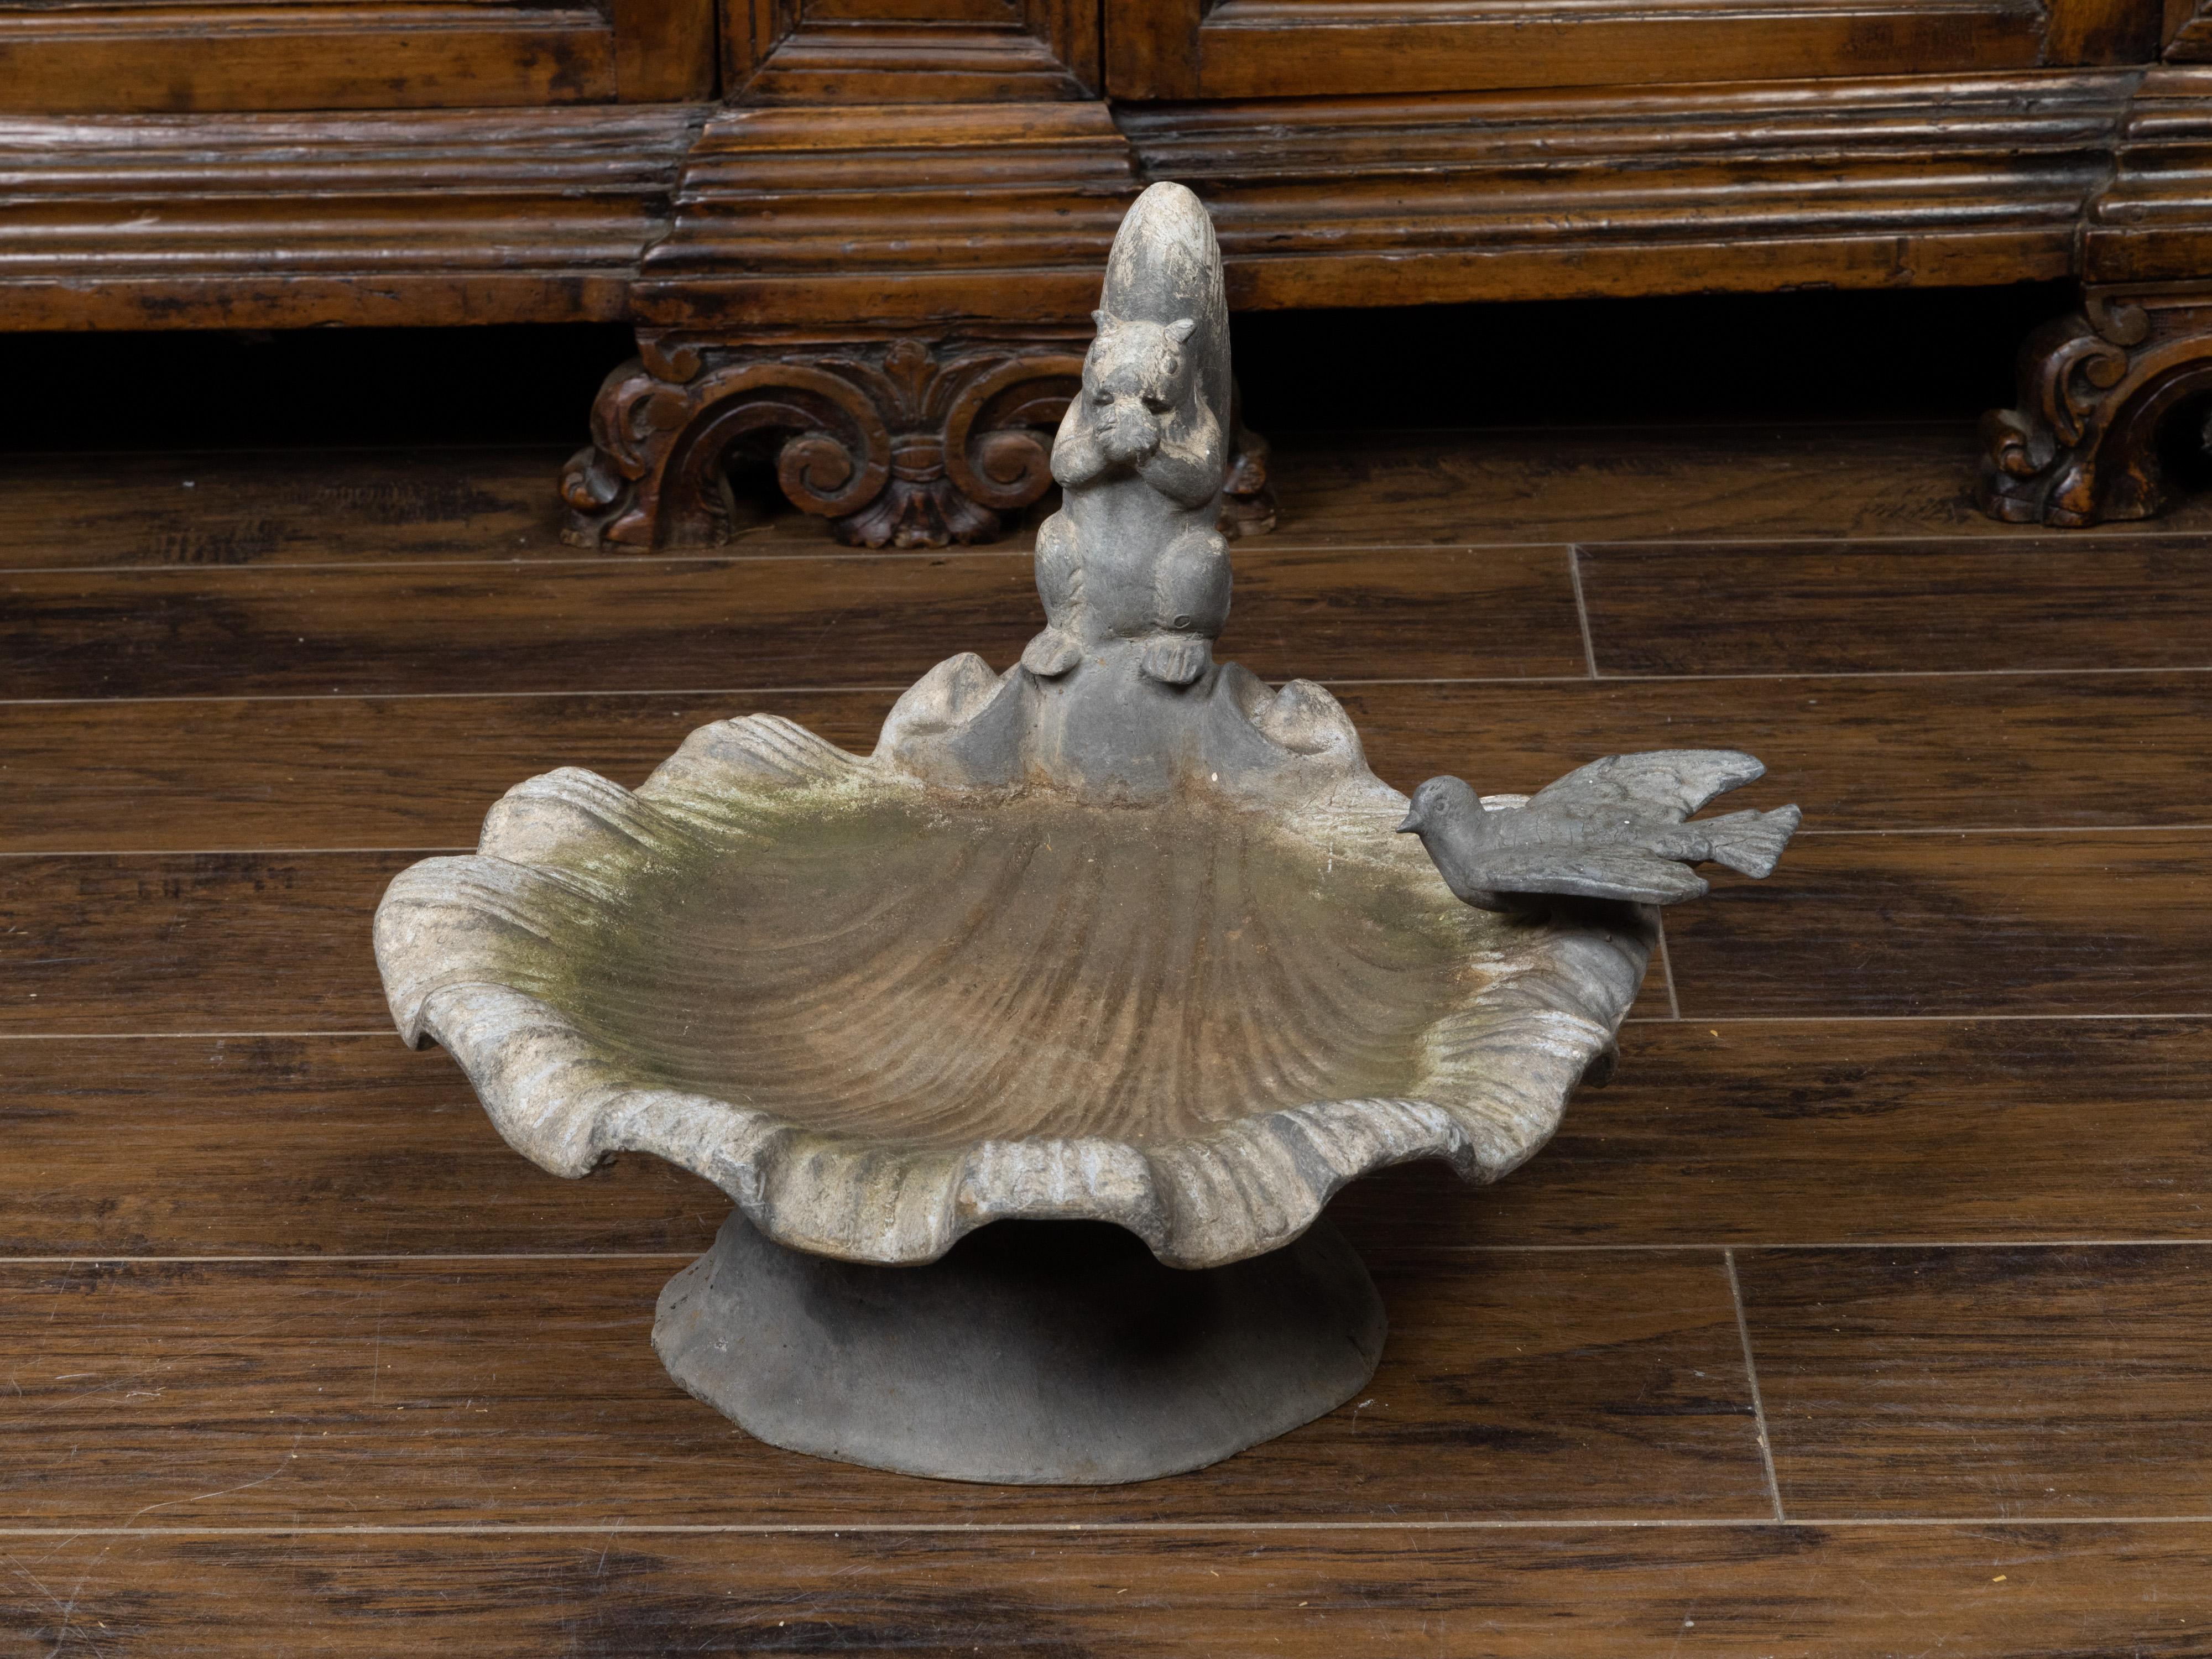 An English lead bird bath from the mid 20th century, with squirrel and bird sitting on a shell. Created in England during the midcentury period, this lead bird bath features a scalloped shell on base, on which a squirrel and a bird are resting. The